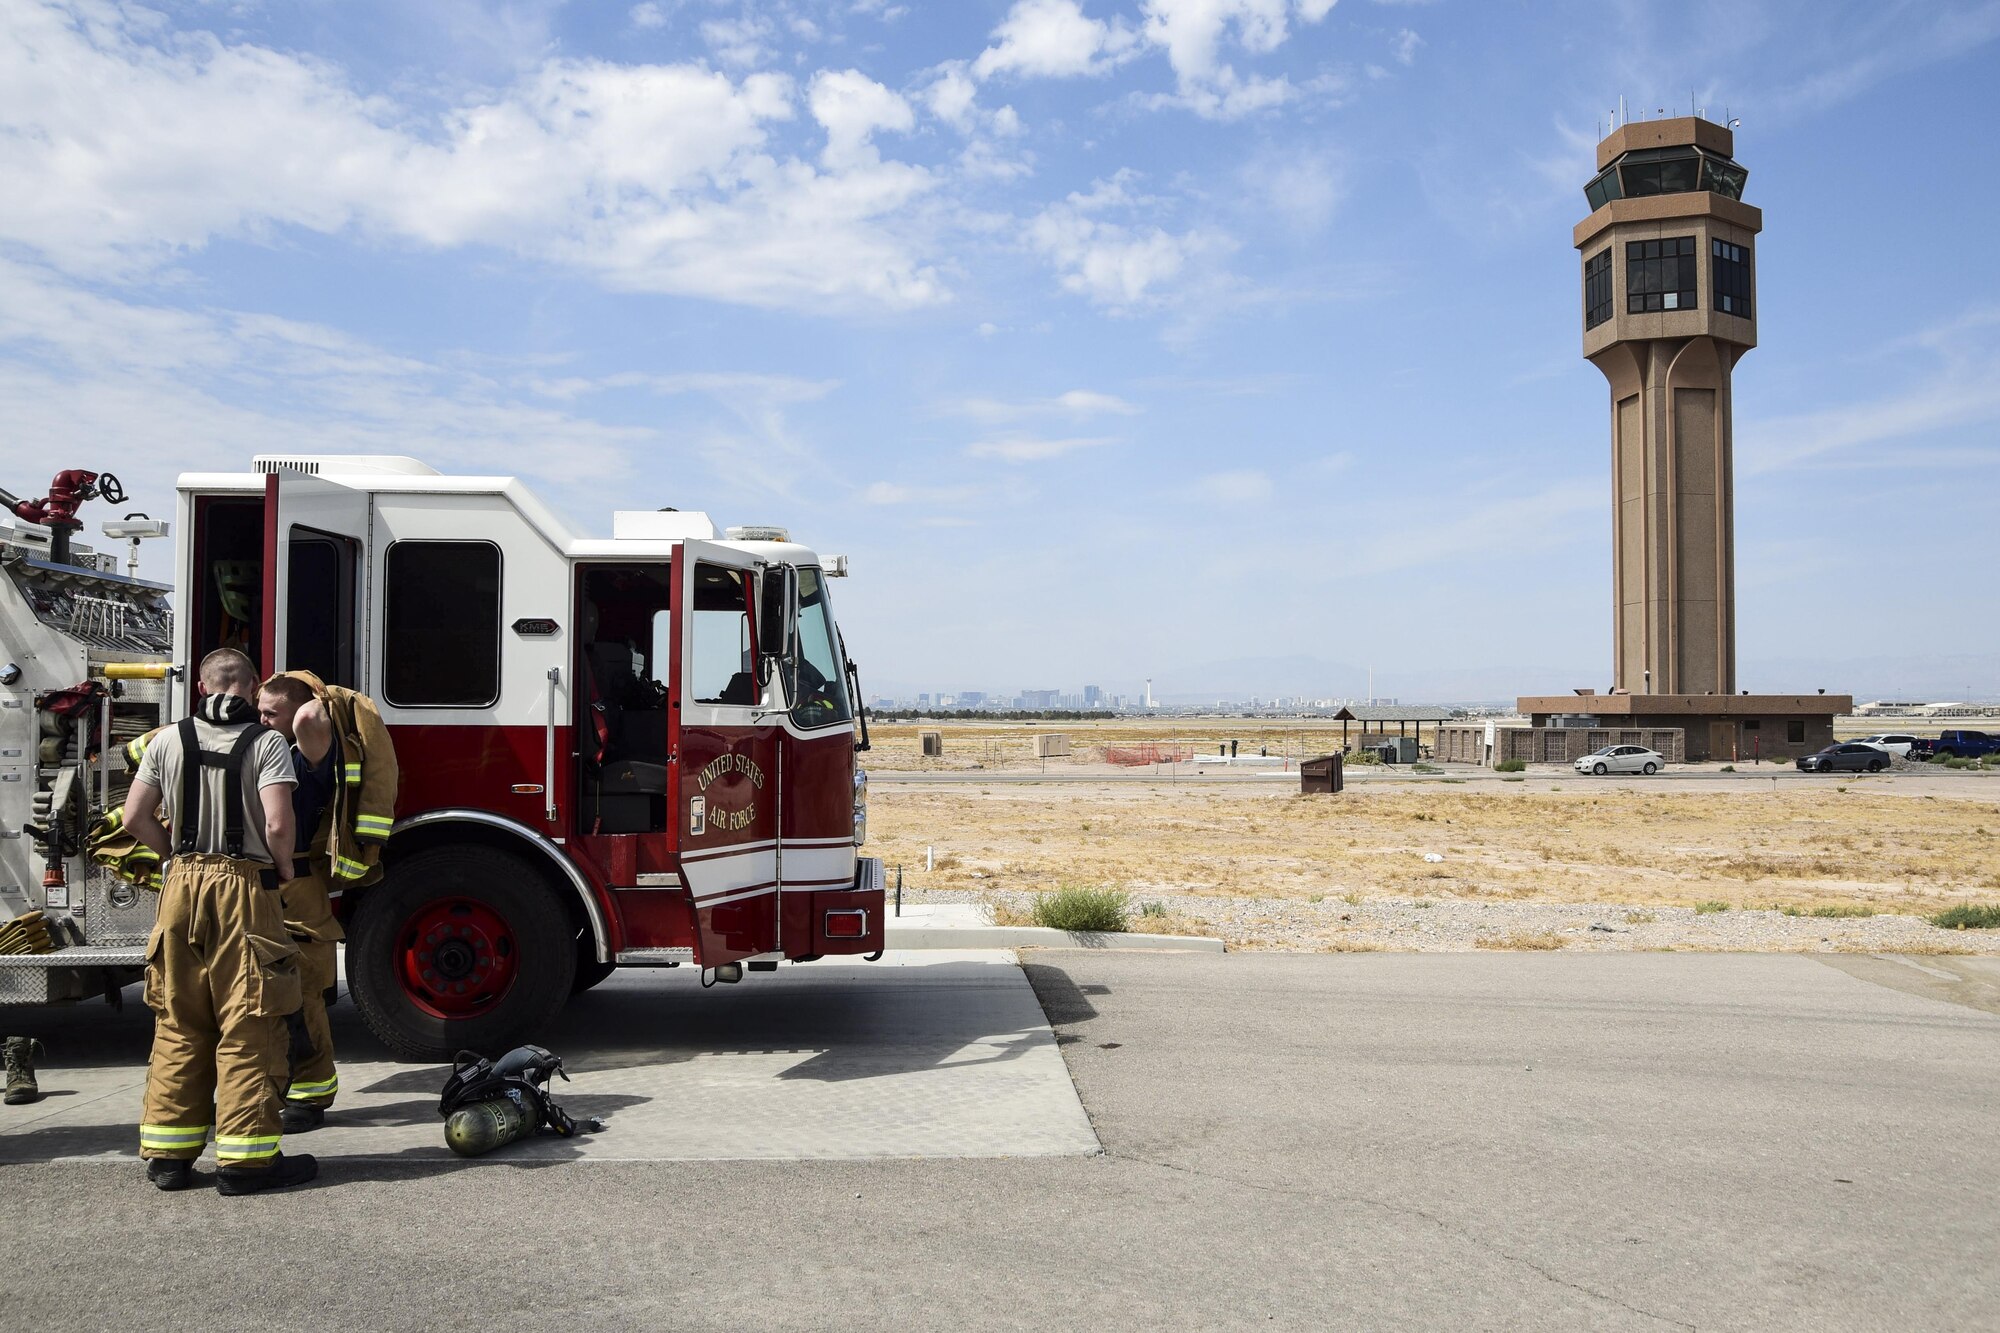 Firefighters assigned to the 99th Civil Engineer Squadron prepare their gear outside the air traffic control tower at Nellis Air Force Base, Nev., July 18, 2017. One of the team’s training exercises is to climb the air traffic control tower’s 10 stories to practice their readiness and emergency response capabilities. (U.S. Air Force photo by Airman 1st Class Andrew D. Sarver/Released)